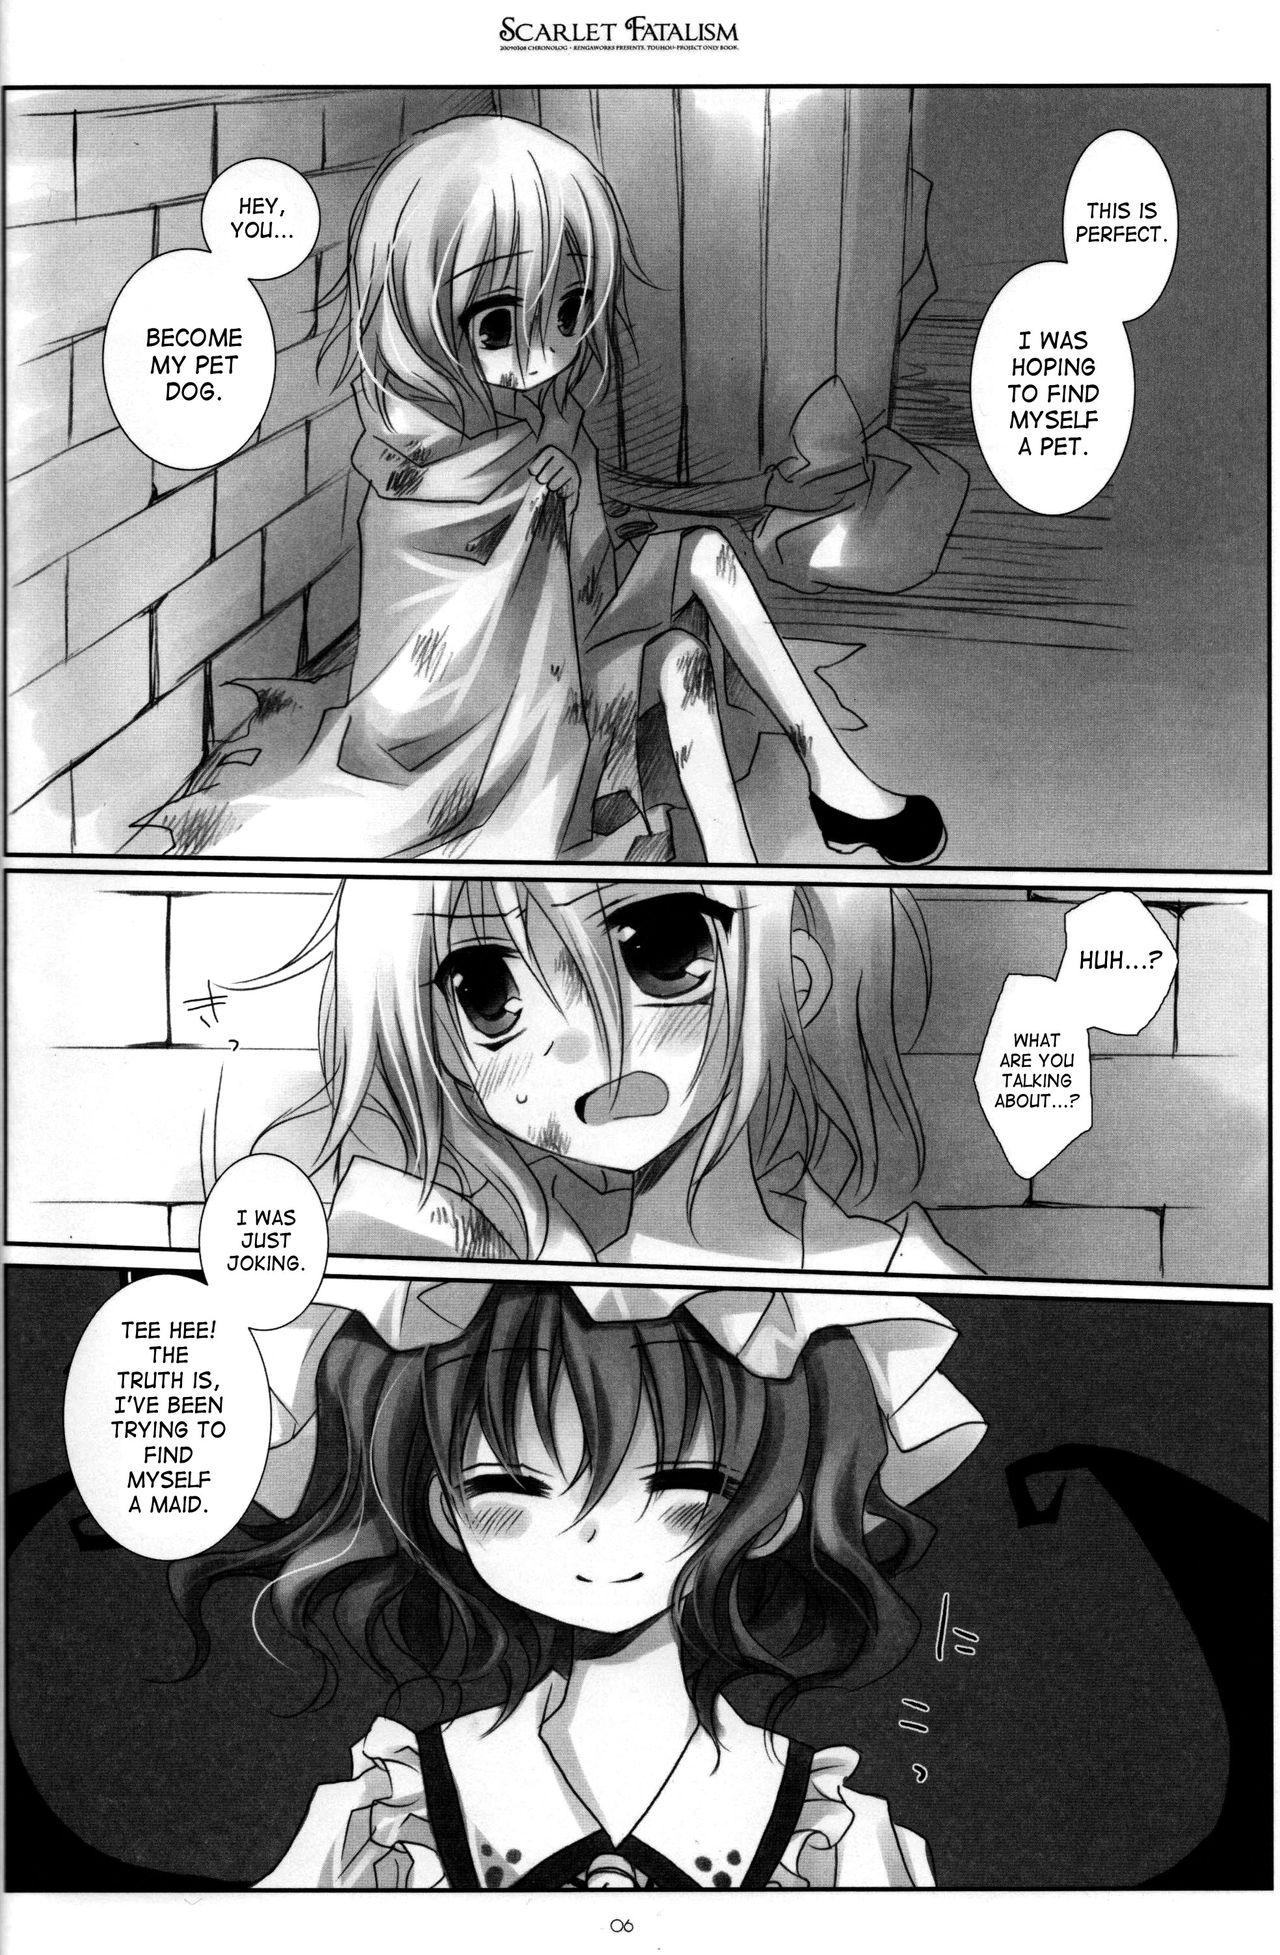 Glam Scarlet Fatalism - Touhou project Cream Pie - Page 7